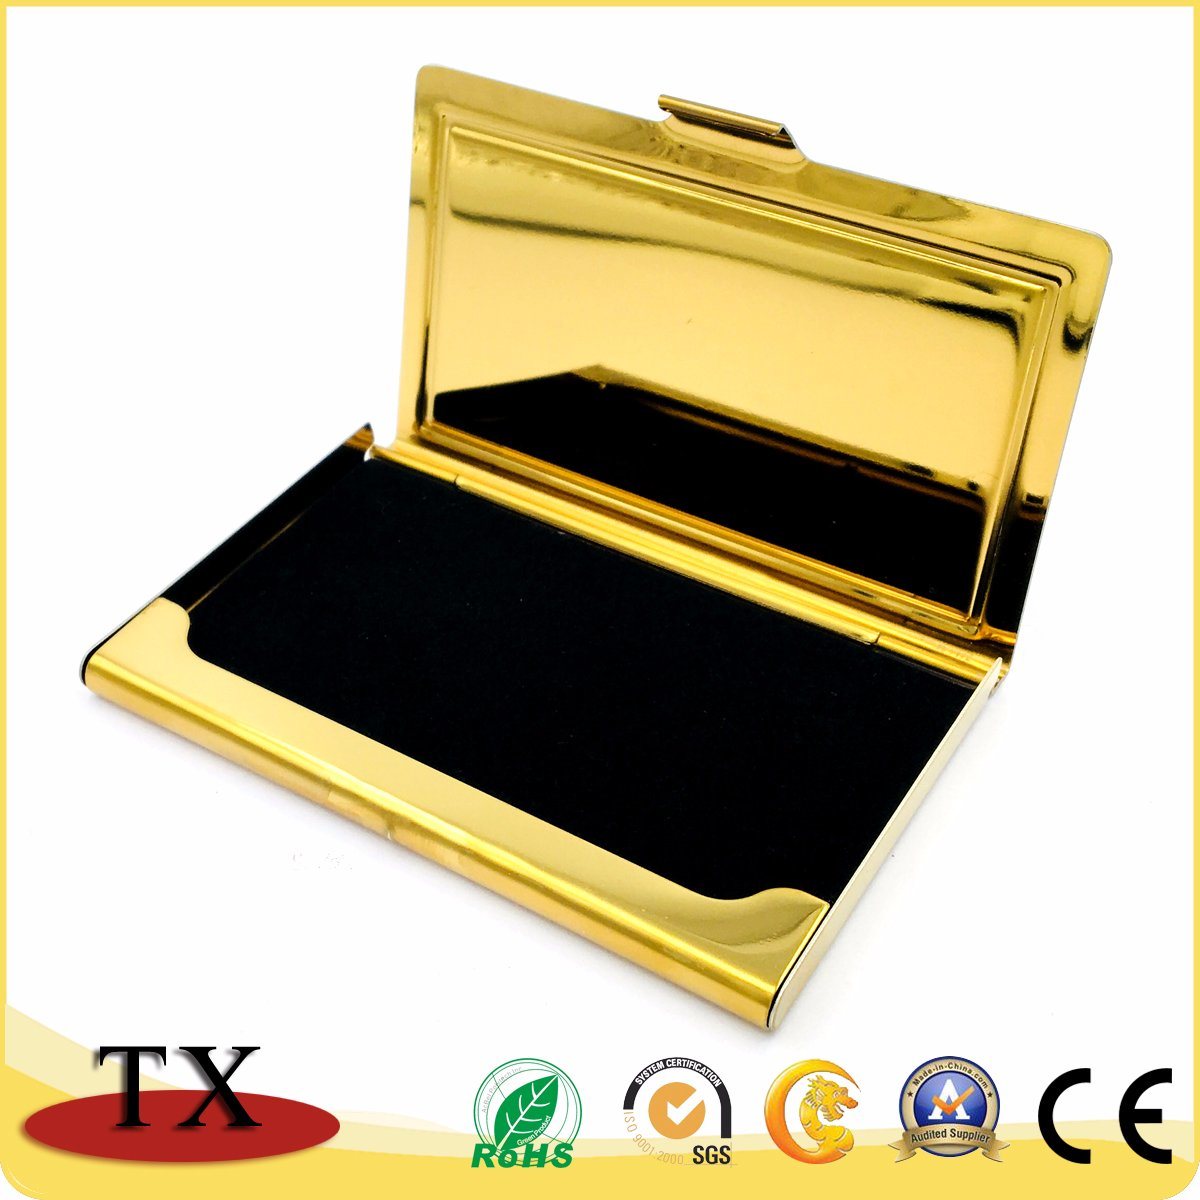 /proimages/2f0j00utGfohNqaBcP/gold-stainless-steel-business-card-holder-for-gift-items.jpg